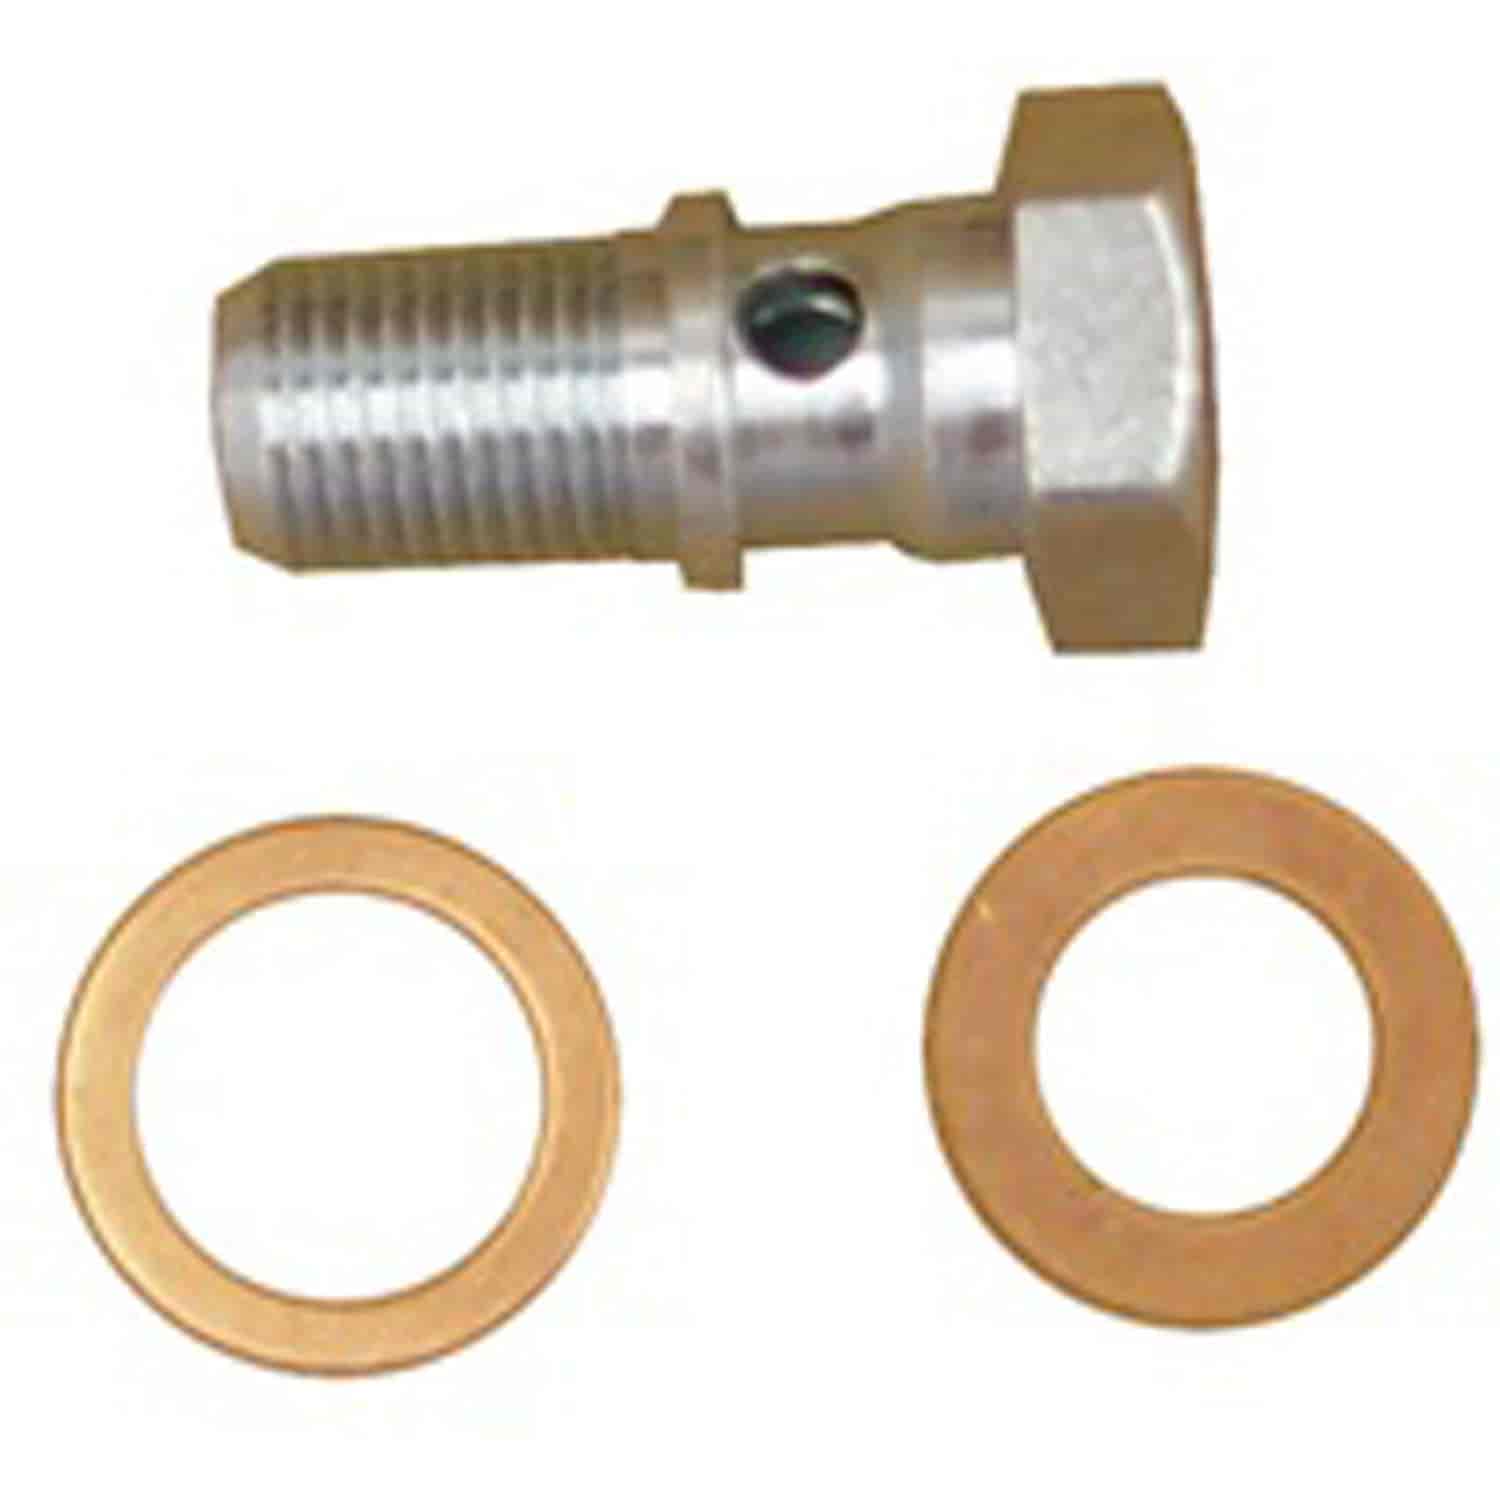 Master brake cylinder outlet fitting kit includes the outlet fitting bolt and 2 copper crush washers